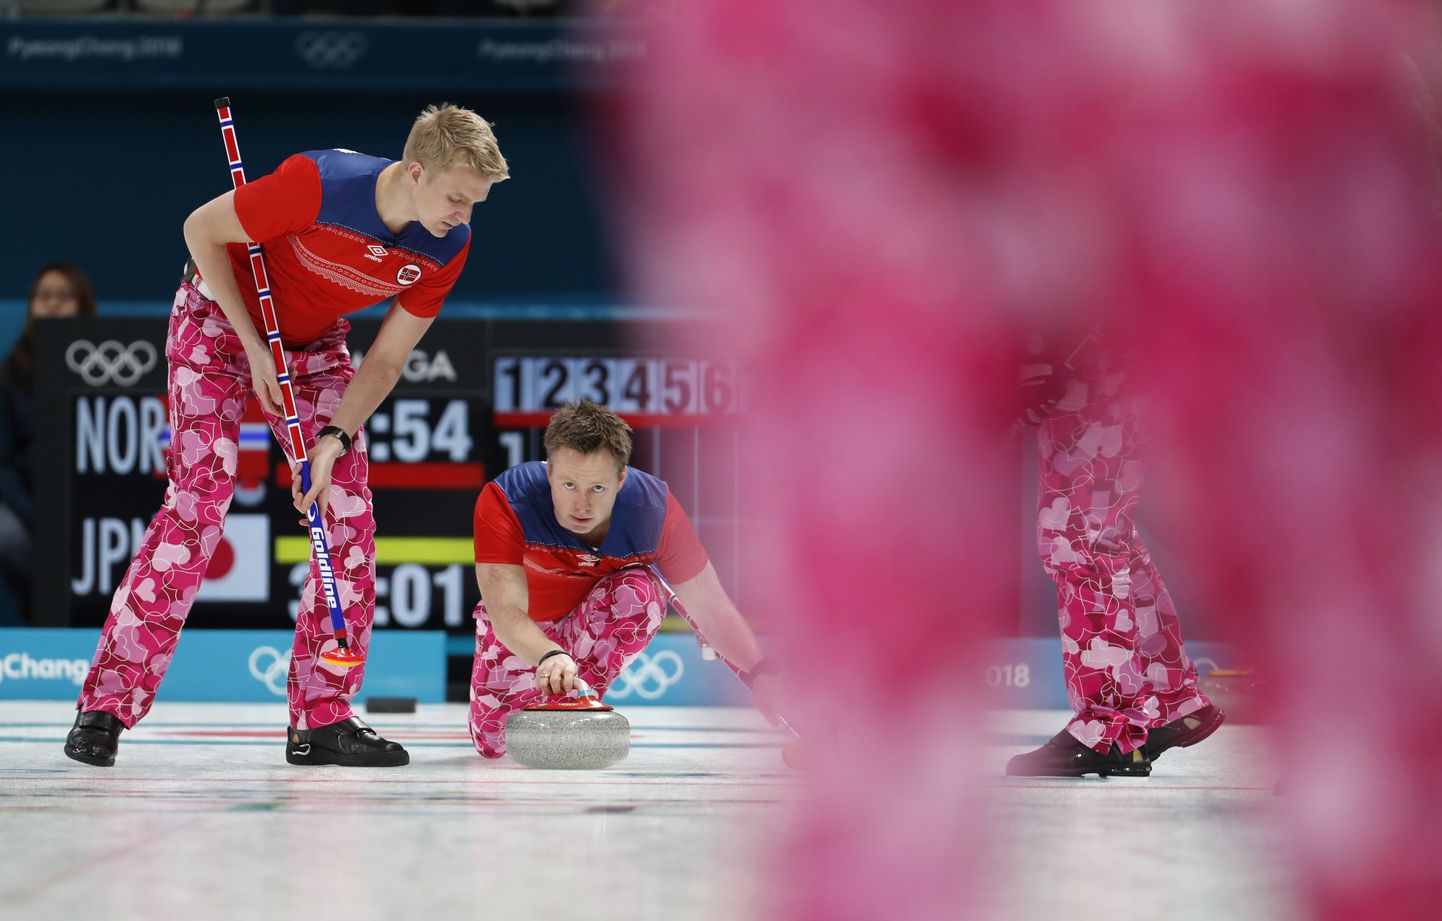 Curling – Pyeongchang 2018 Winter Olympics – Men Round Robin - Norway v Japan - Gangneung Curling Center - Gangneung, South Korea – February 14, 2018 - Vice-skip Torger Nergaard of Norway delivers the stone as lead Haavard Vad Petersson of Norway looks on. REUTERS/Cathal McNaughton